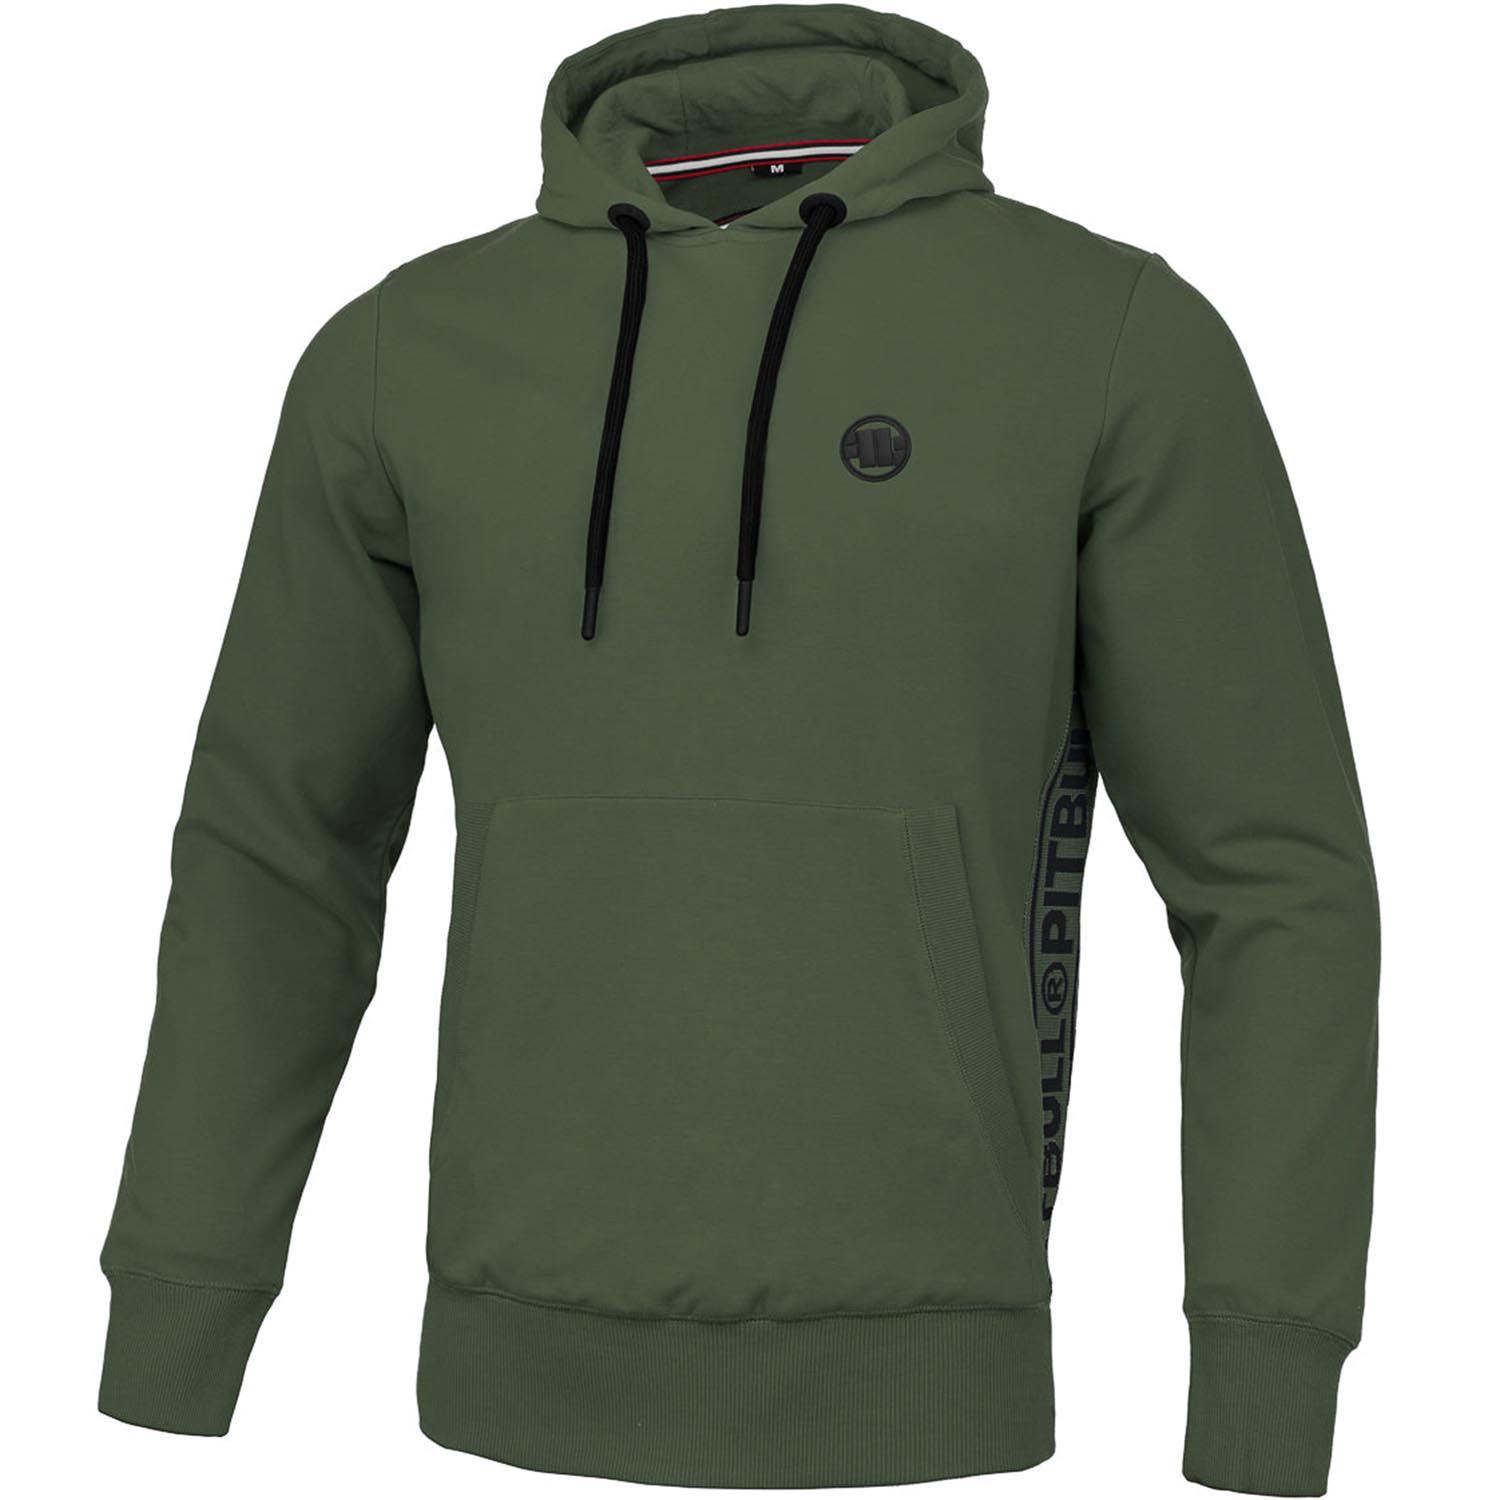 Pit Bull West Coast Hoody, Hinson French Terry, olive